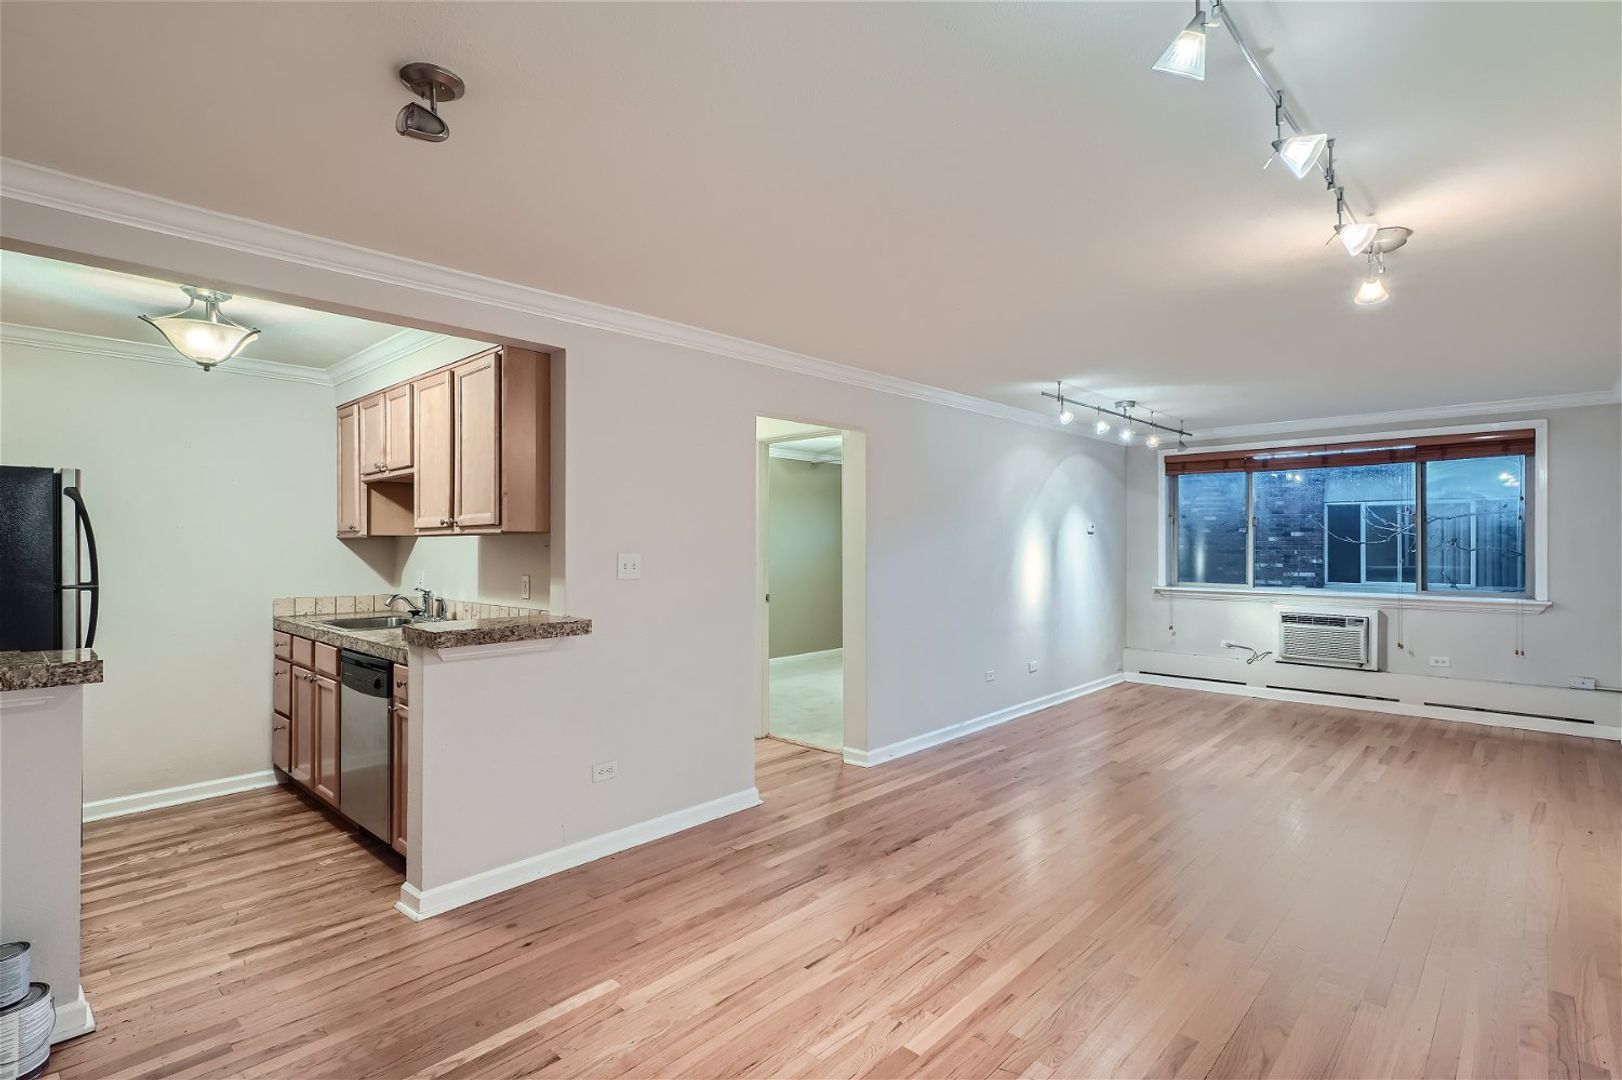 Charming 1 BR Condo in the West Wash Park Neighborhood